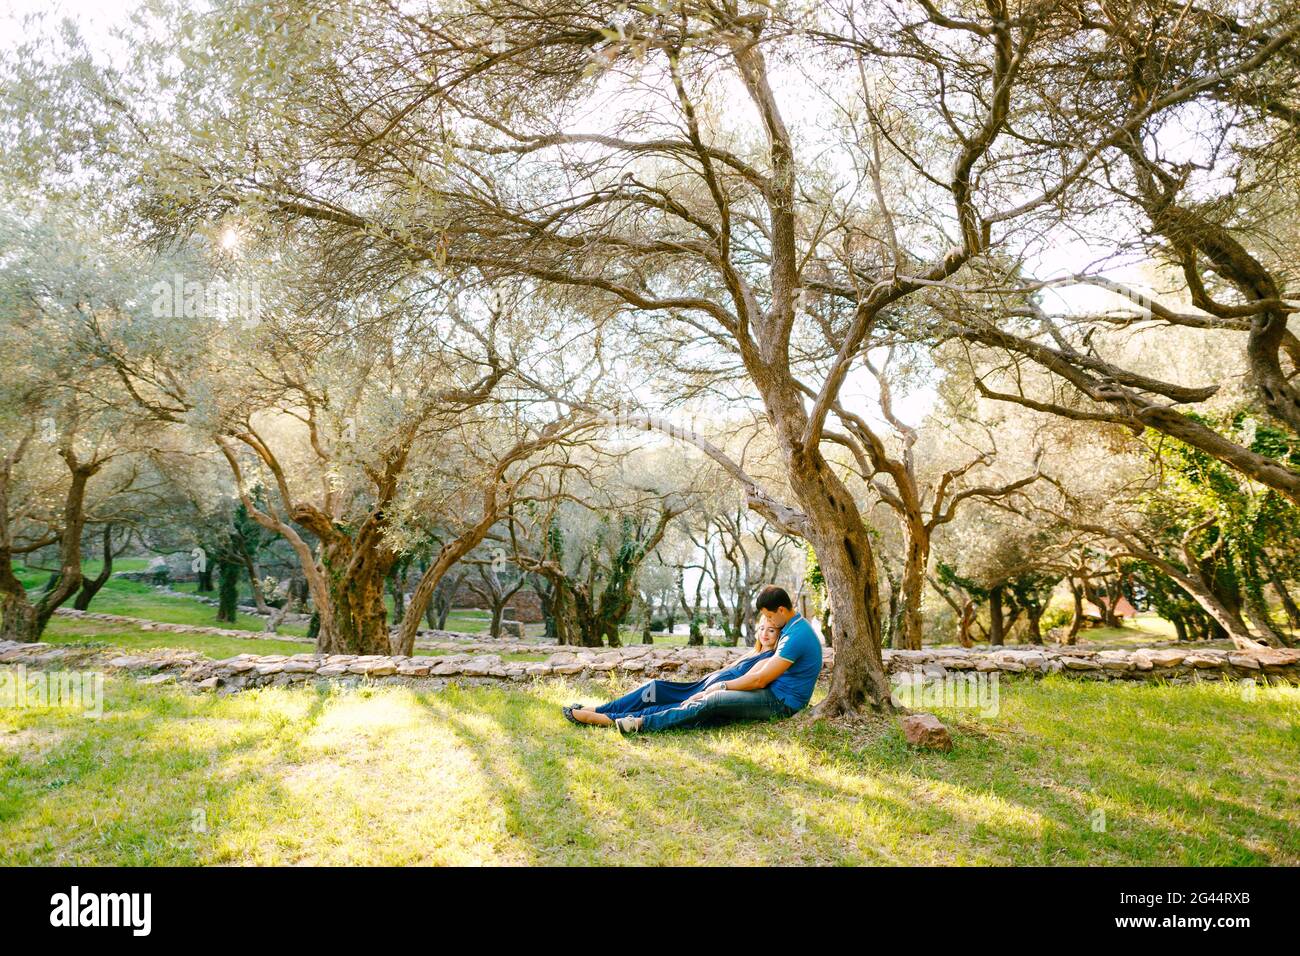 Man with a pregnant woman in a long blue dress lie on the grass under a sprawling olive tree in the park Stock Photo